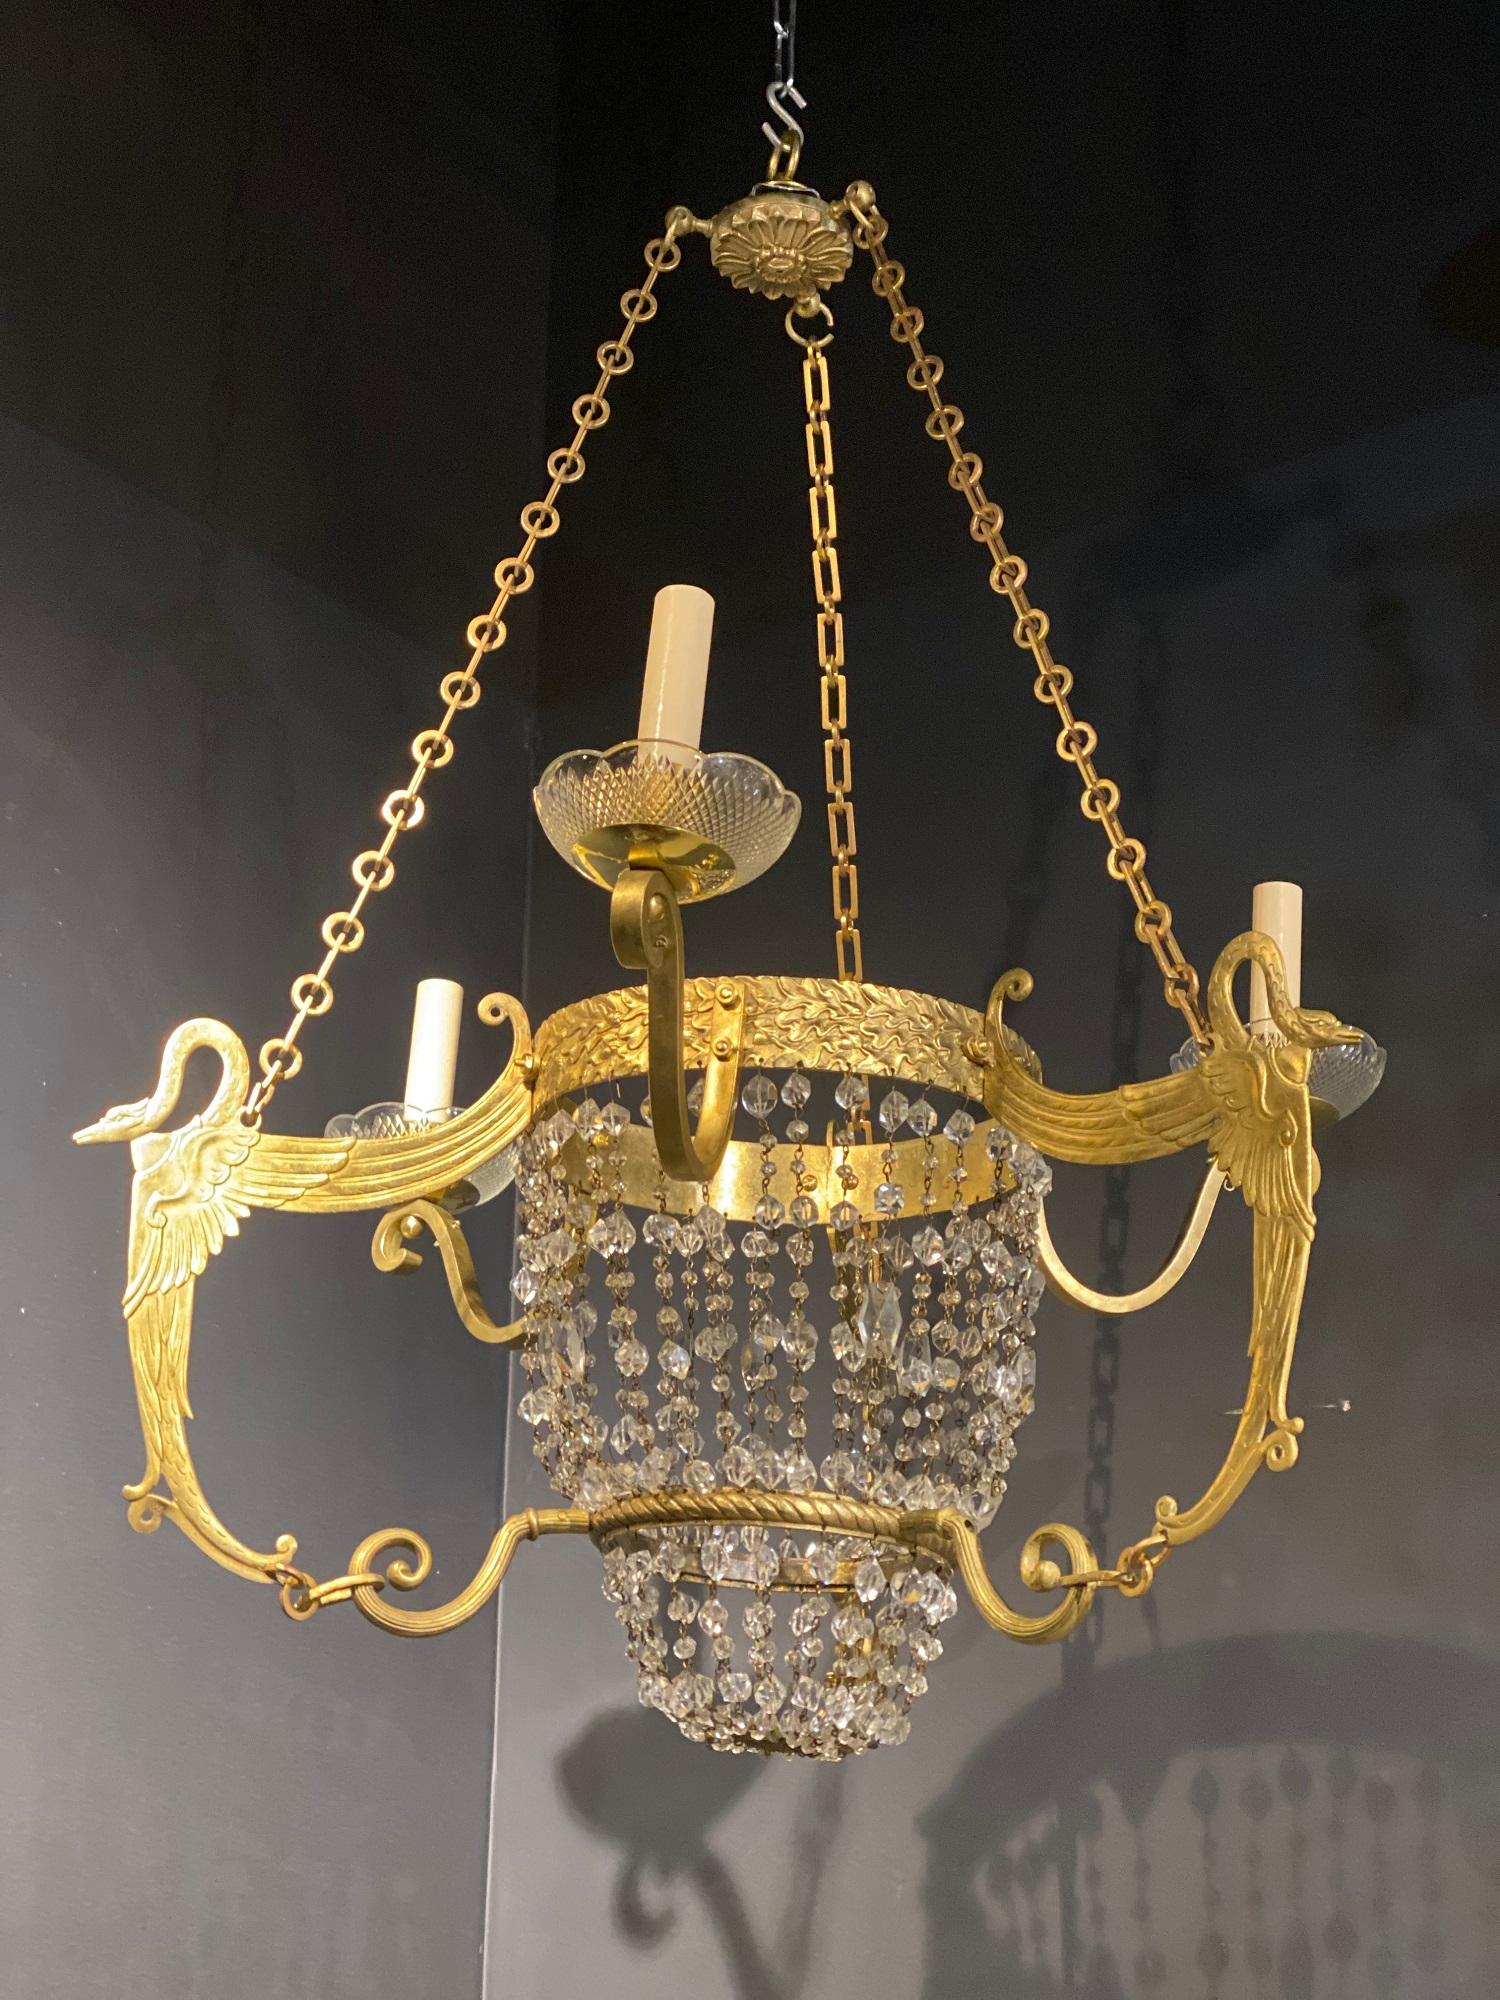 A circa 1920’s French Empire three lights chandelier with swans and beaded crystals